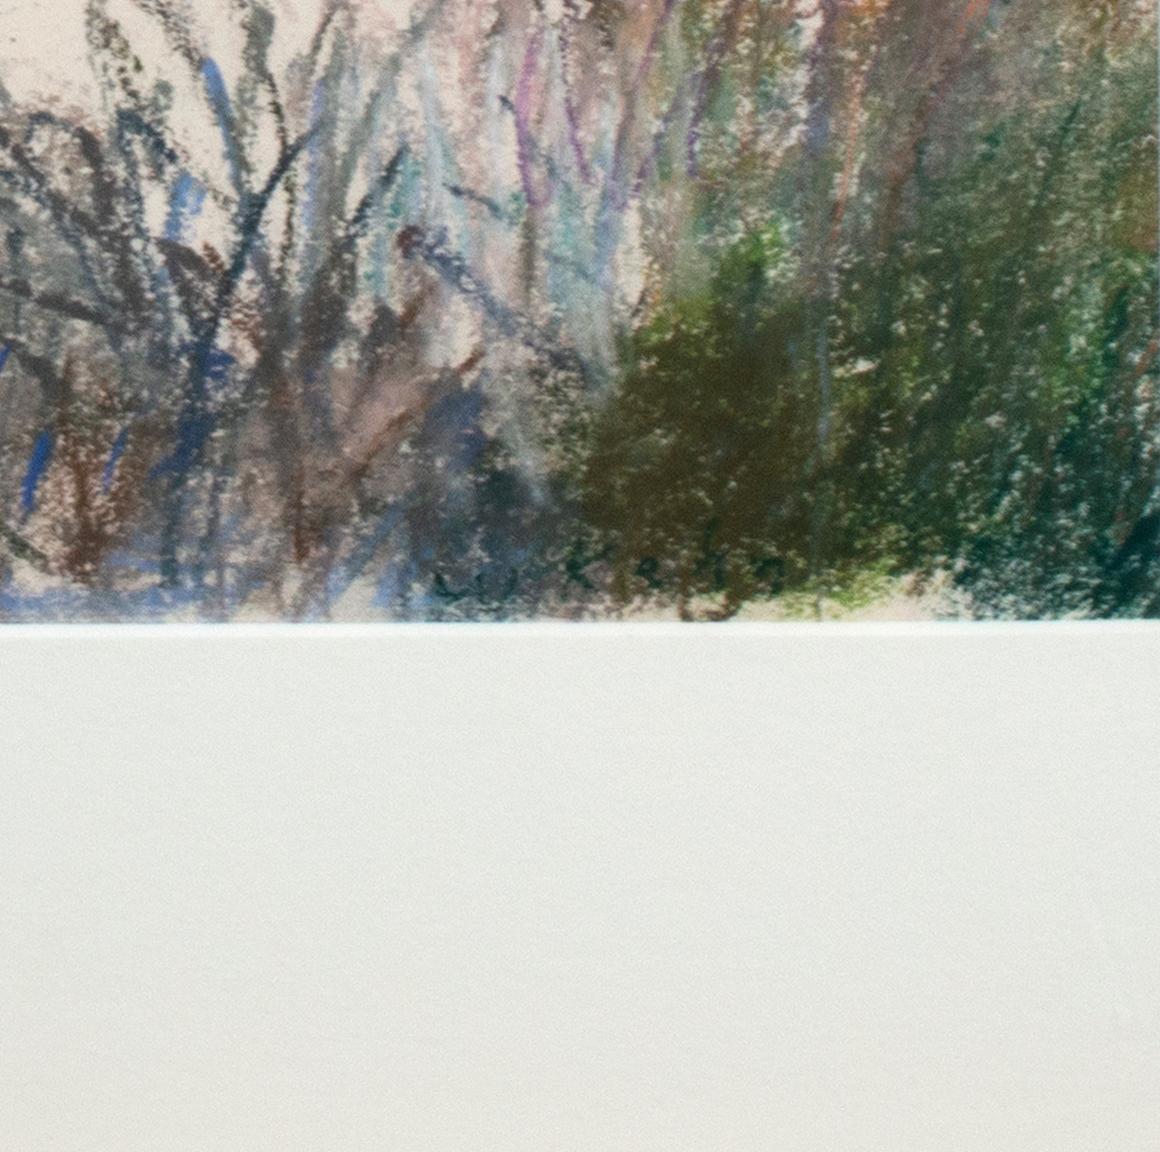 'Study for Connecticut at Putney' is an original pastel drawing by American artist Wolf Kahn. The landscape is an exploration of color and light: it is rendered in cool blues and purples with fields of subtle yellow, the pastels treated with the